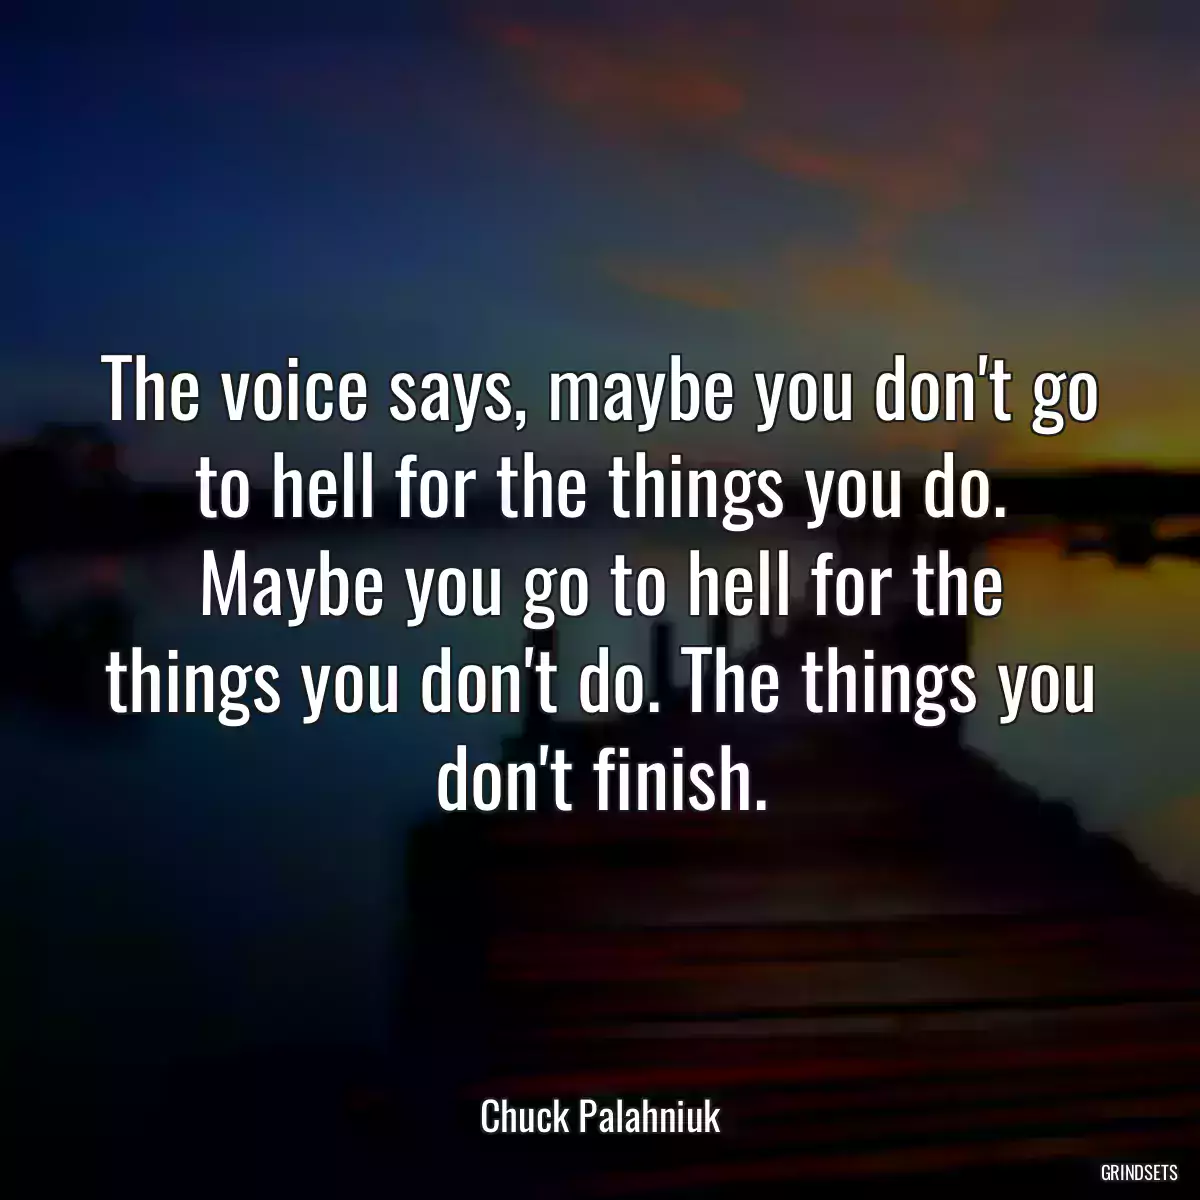 The voice says, maybe you don\'t go to hell for the things you do. Maybe you go to hell for the things you don\'t do. The things you don\'t finish.